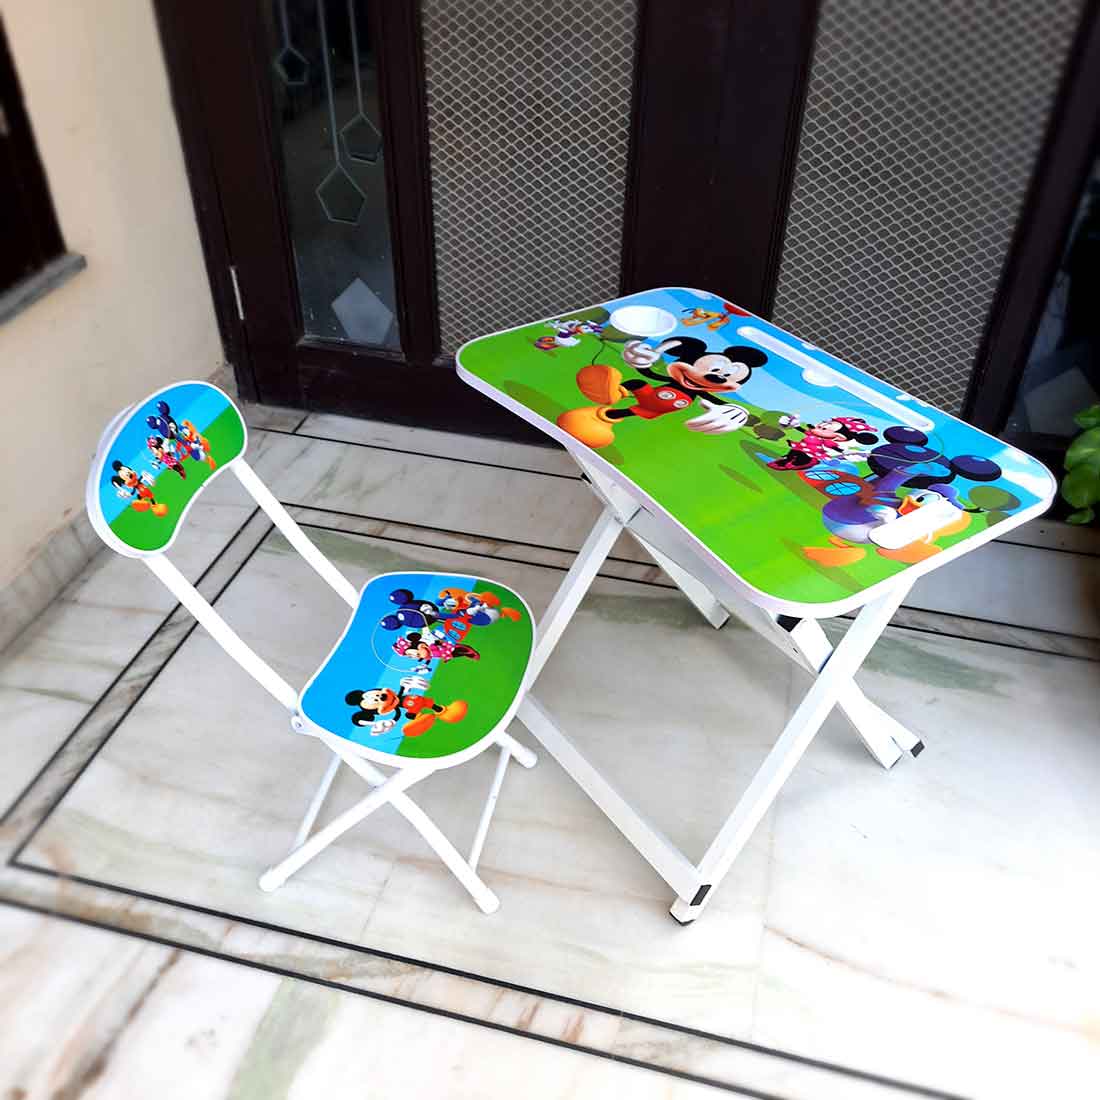 Kids Study Table Chair Set - Mickey Mouse Design - for Arts & Craft | Reading | Home Work - ApkaMart